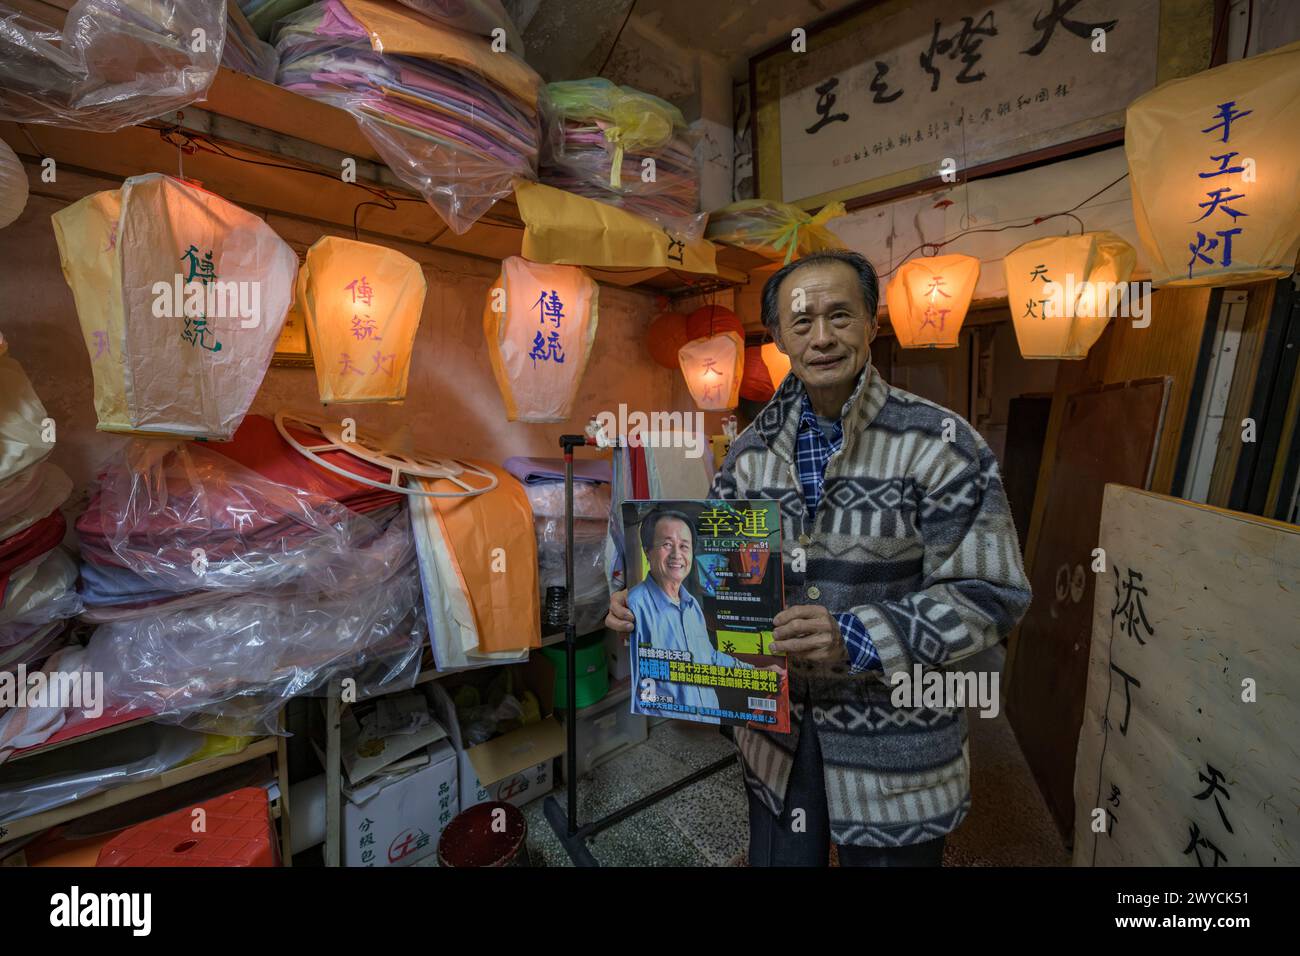 Elderly man proudly displaying traditional paper lanterns at an old shop Stock Photo